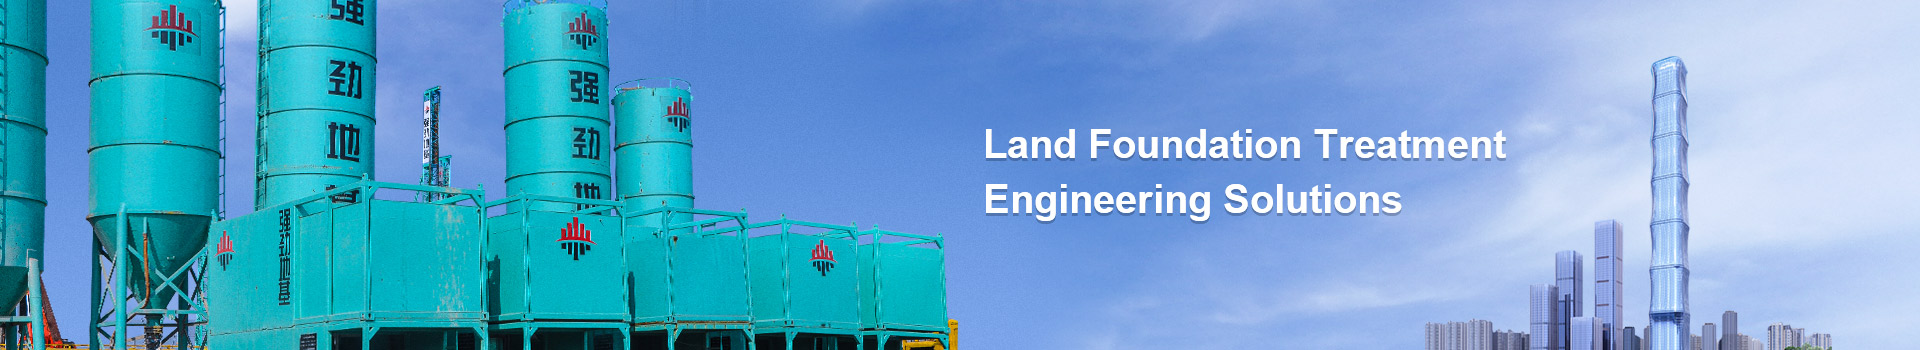 Land Foundation Treatment Engineering Solutions